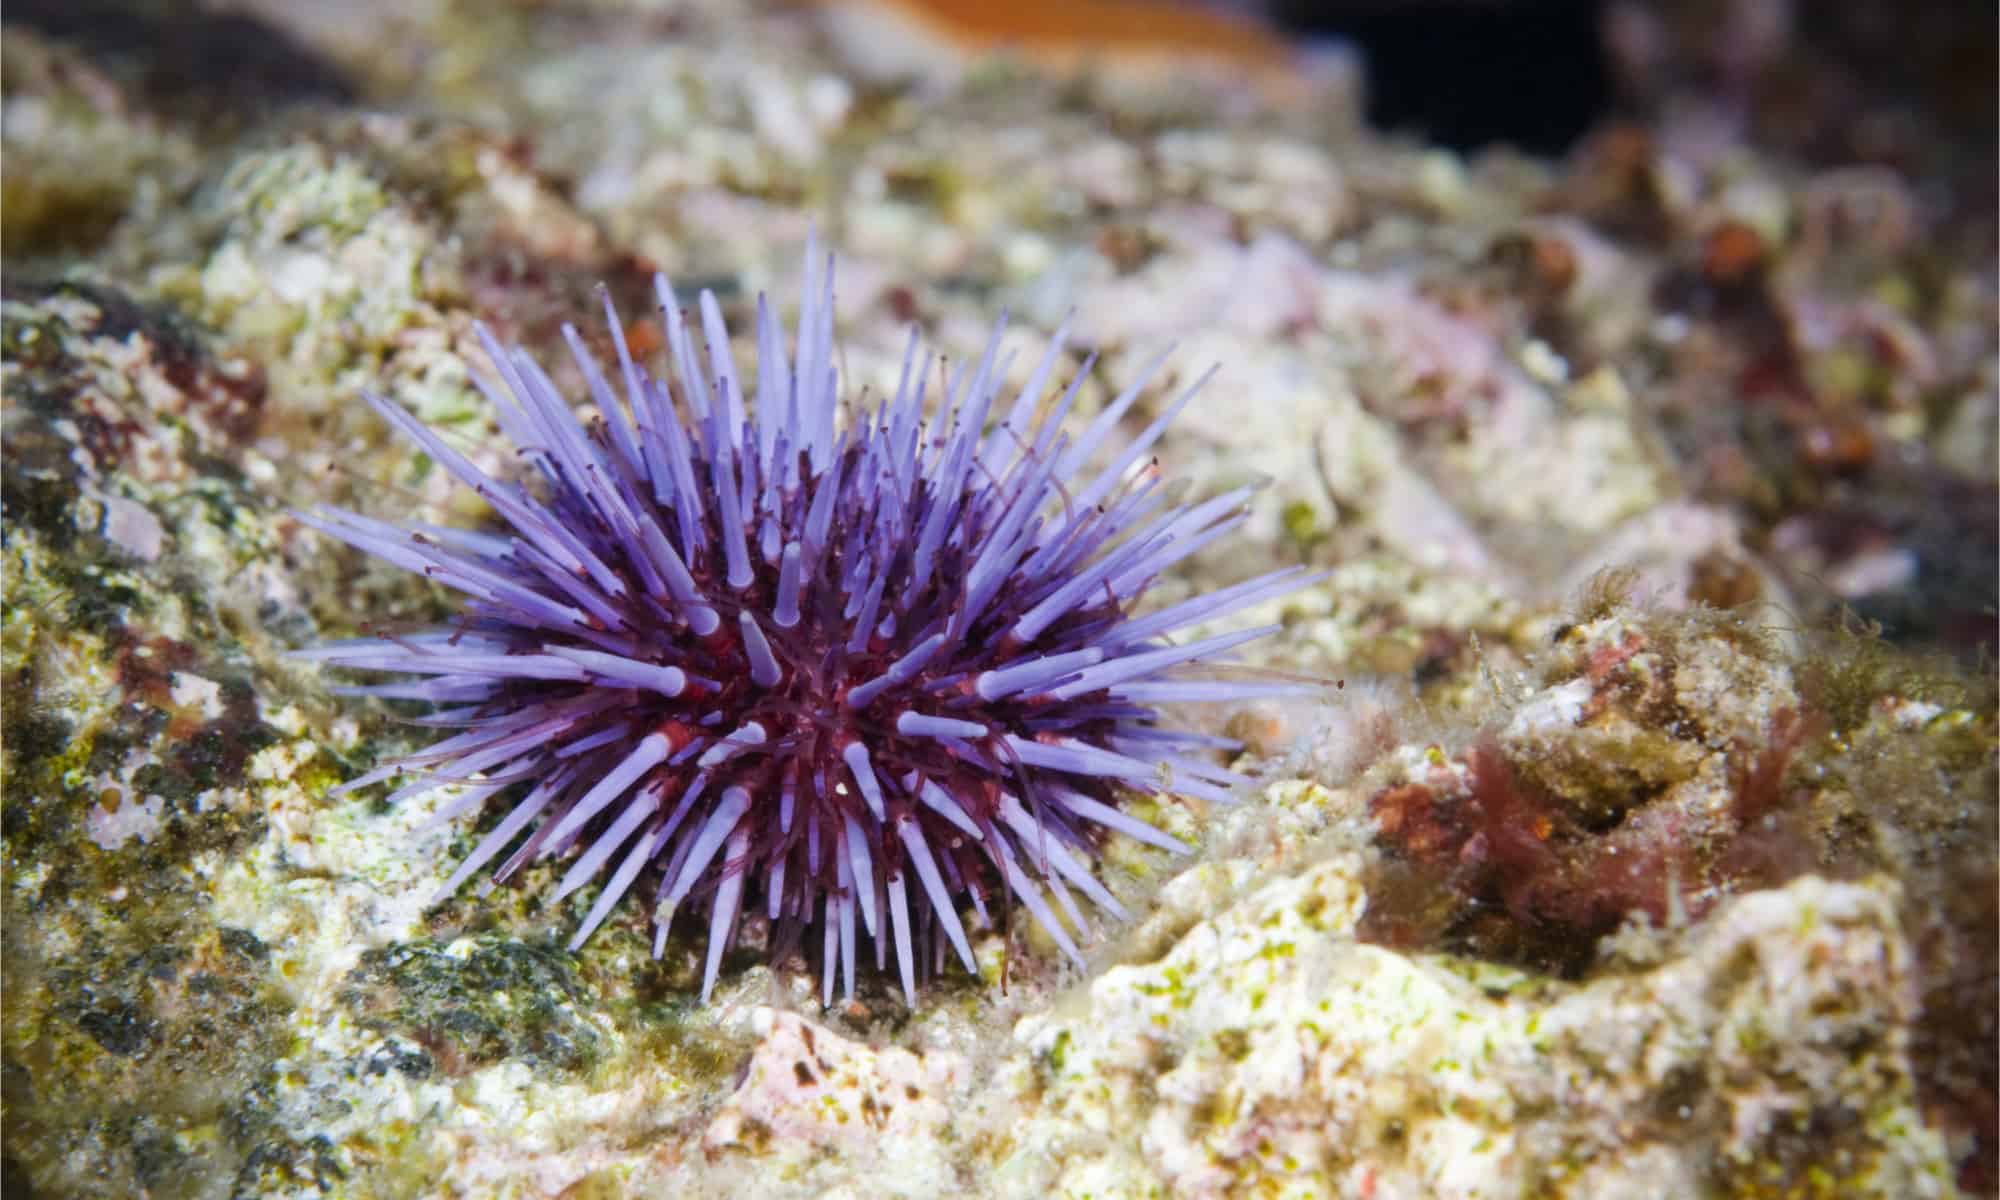 What Do Sea Urchins Eat